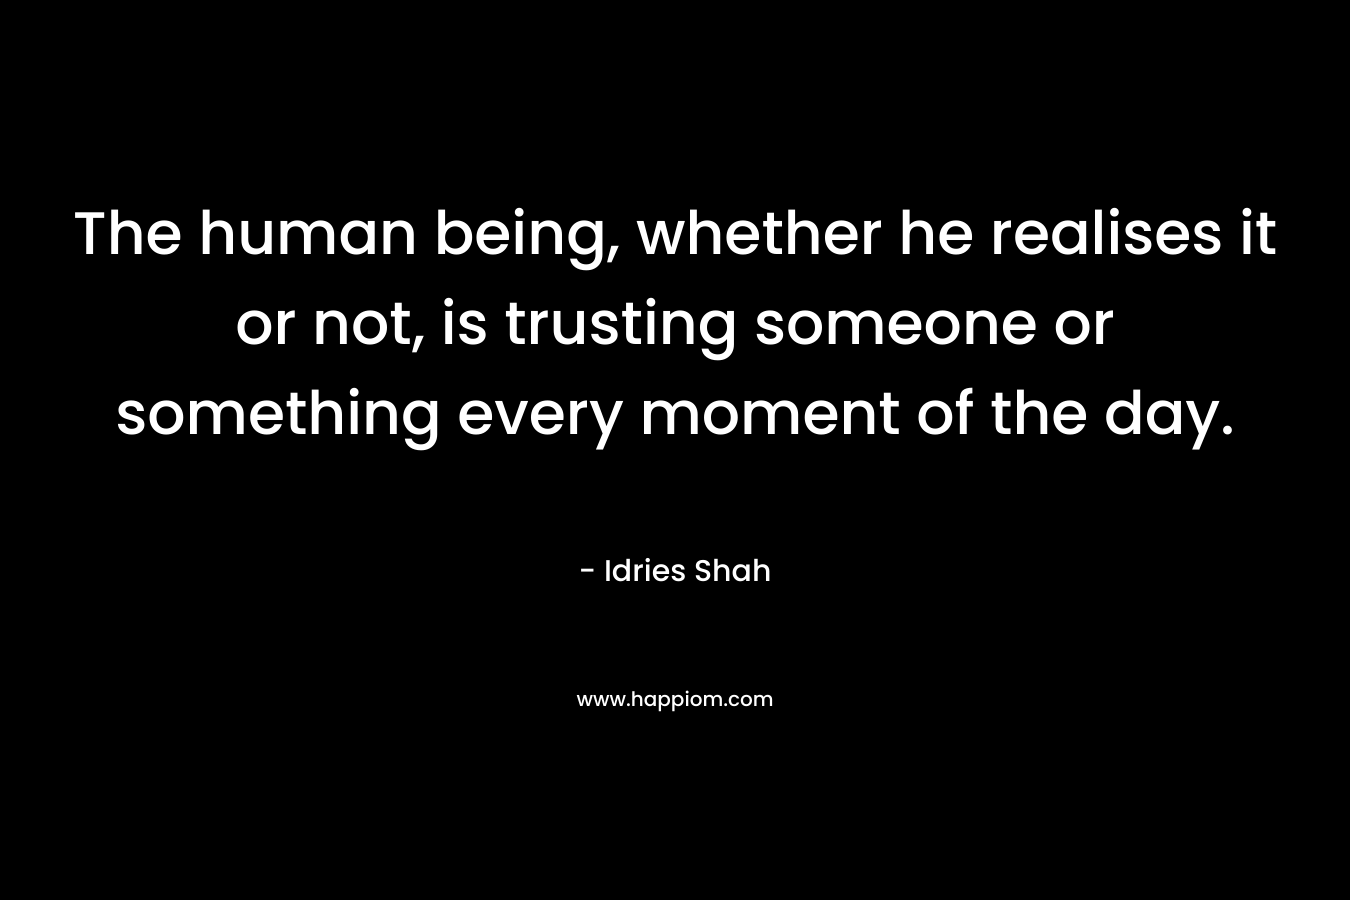 The human being, whether he realises it or not, is trusting someone or something every moment of the day. – Idries Shah